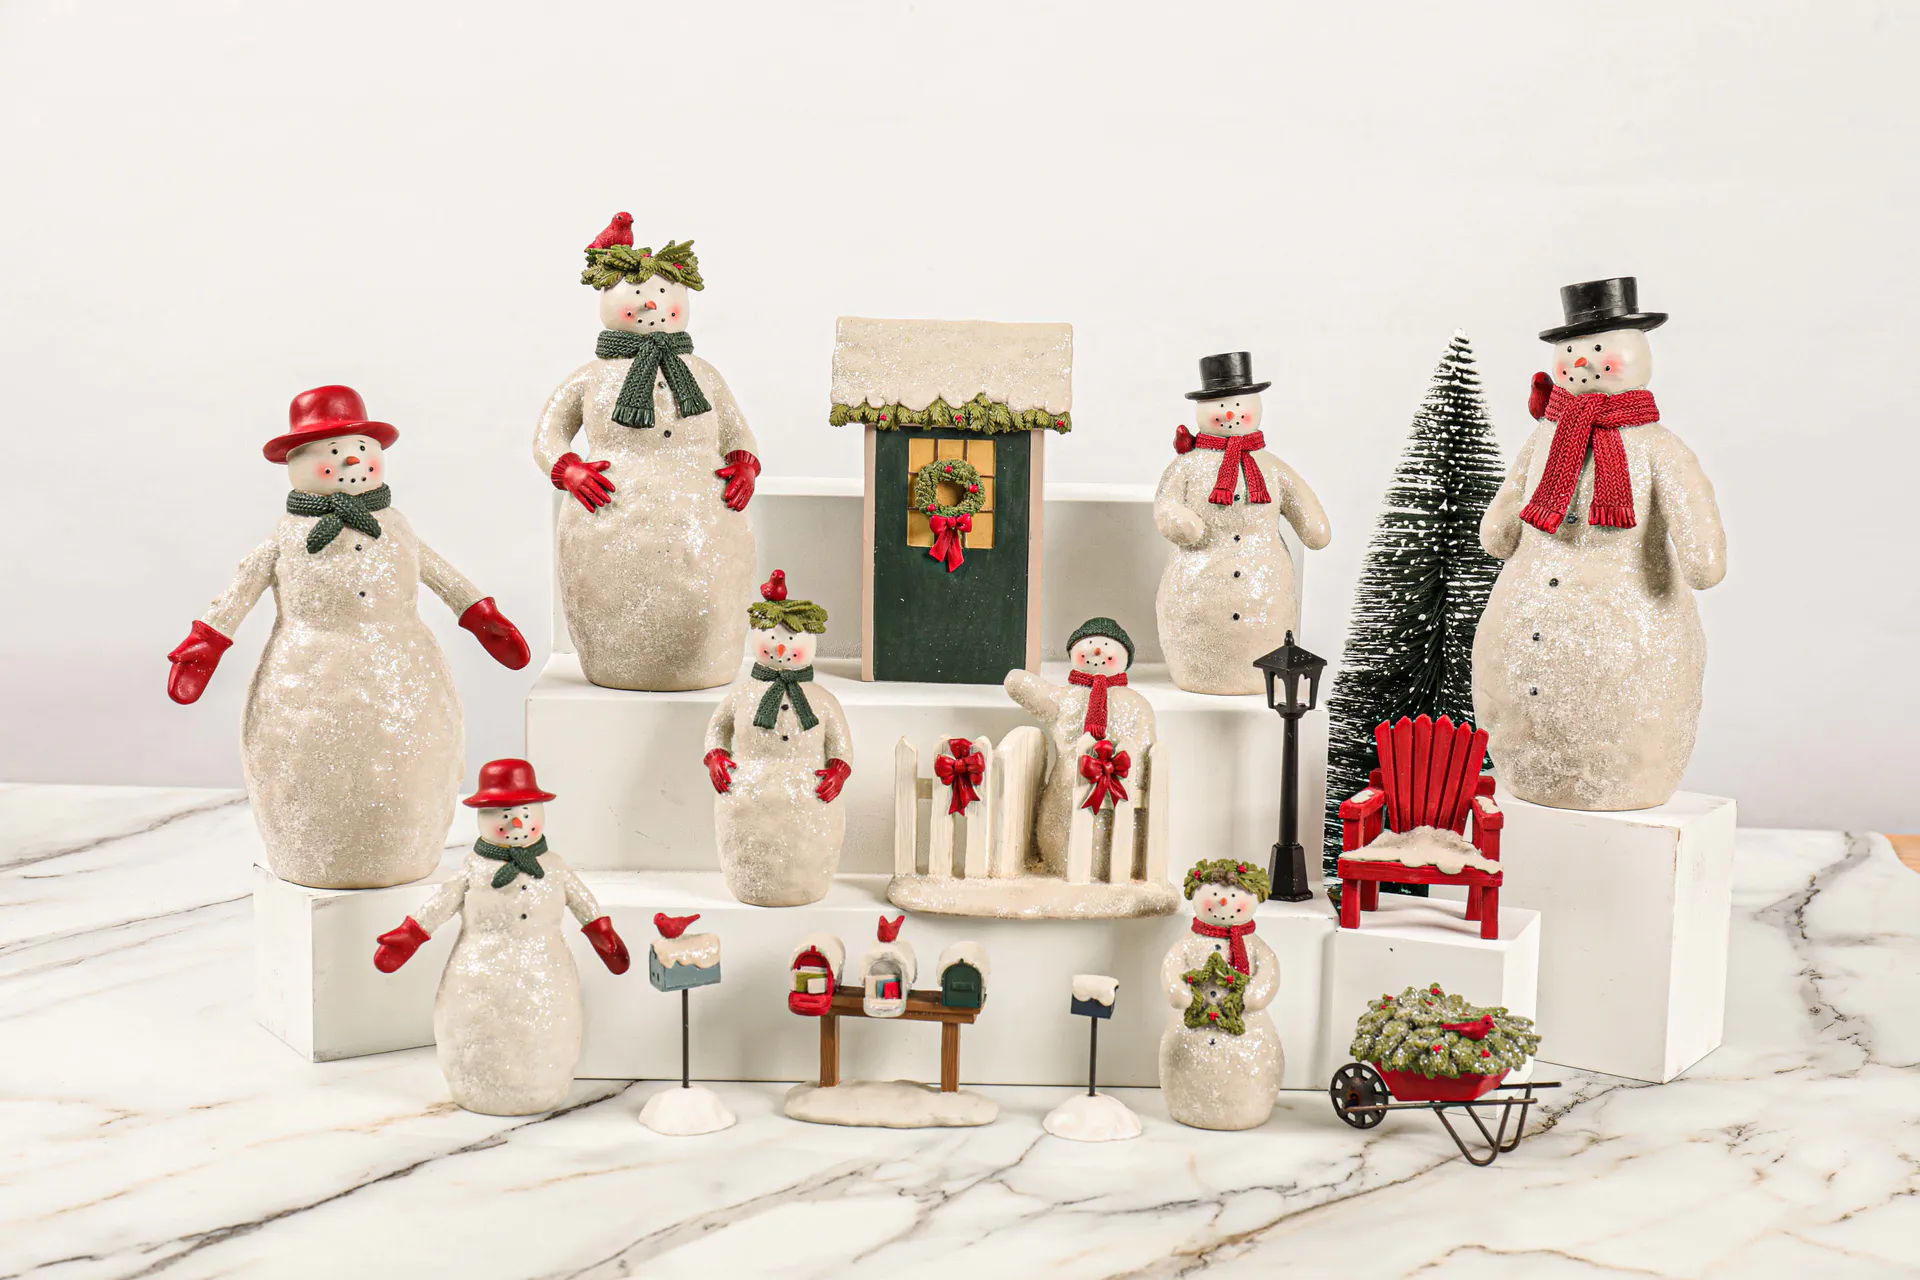 Resin Snowman And Fence Figurine Snow Scene Winter Crafts For Christmas Decoration